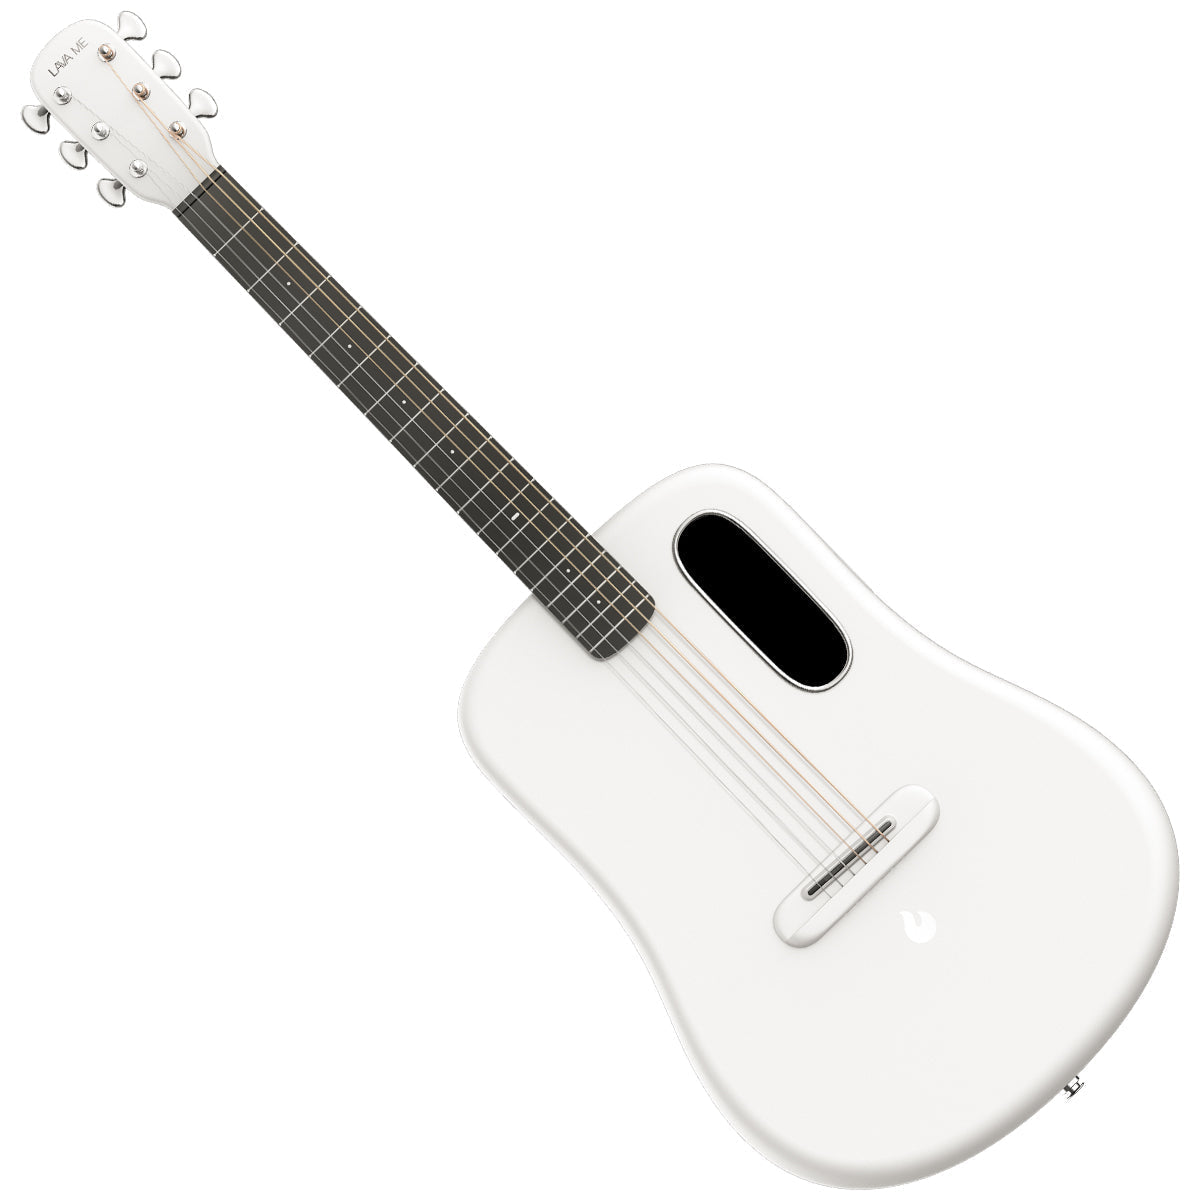 LAVA ME 3 38" with Space Bag ~ Left Hand ~ White, Acoustic Guitar for sale at Richards Guitars.